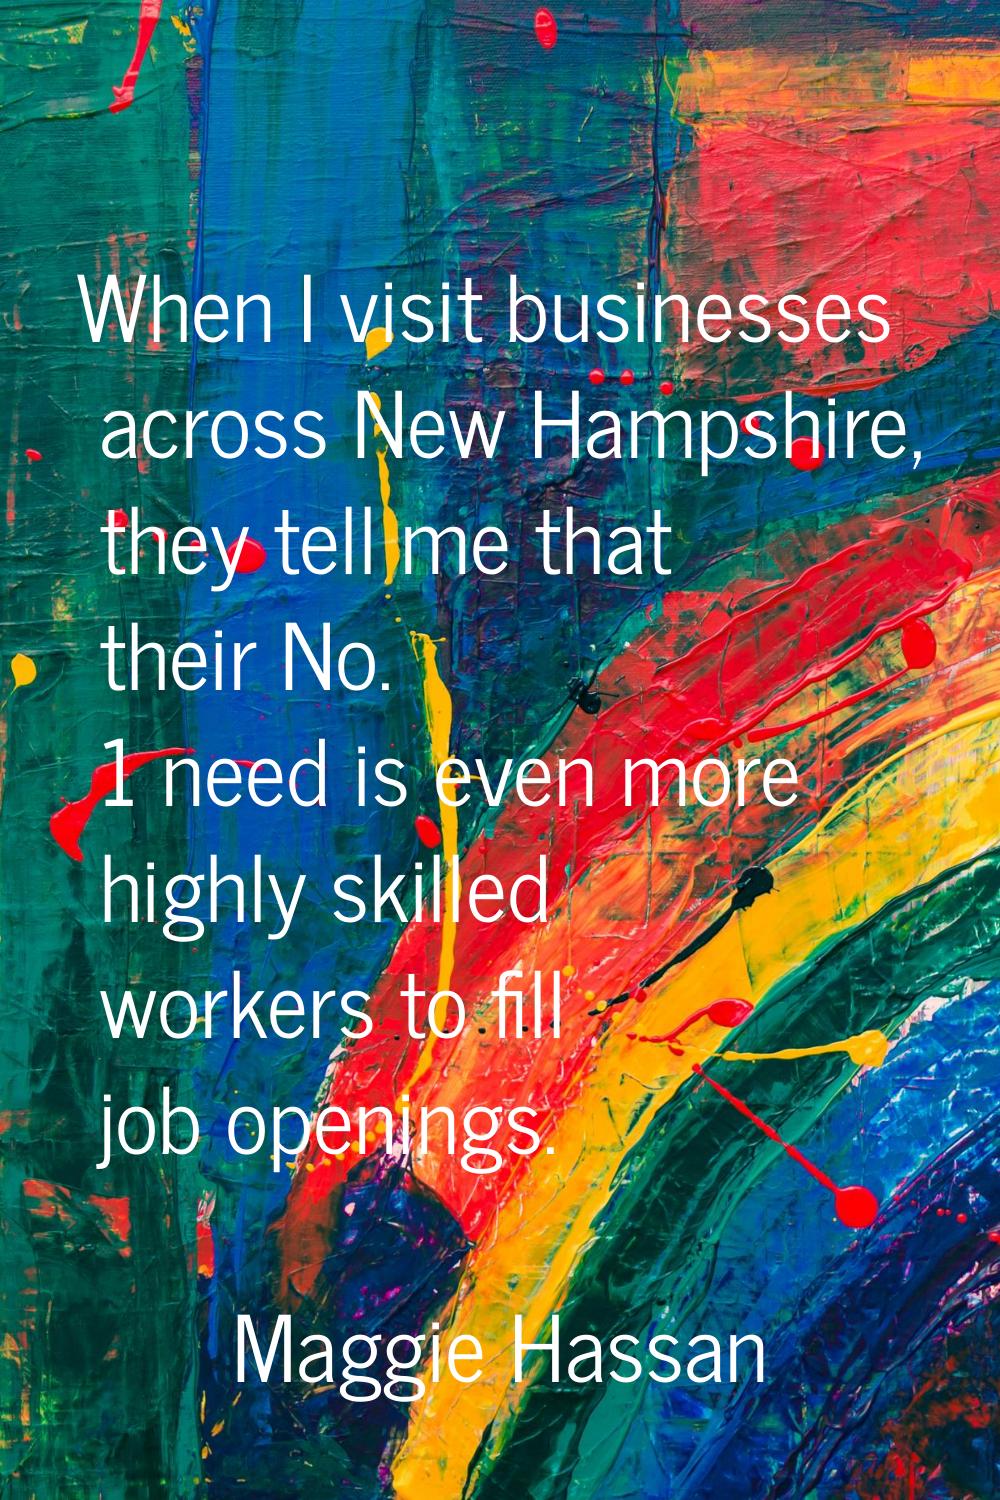 When I visit businesses across New Hampshire, they tell me that their No. 1 need is even more highl